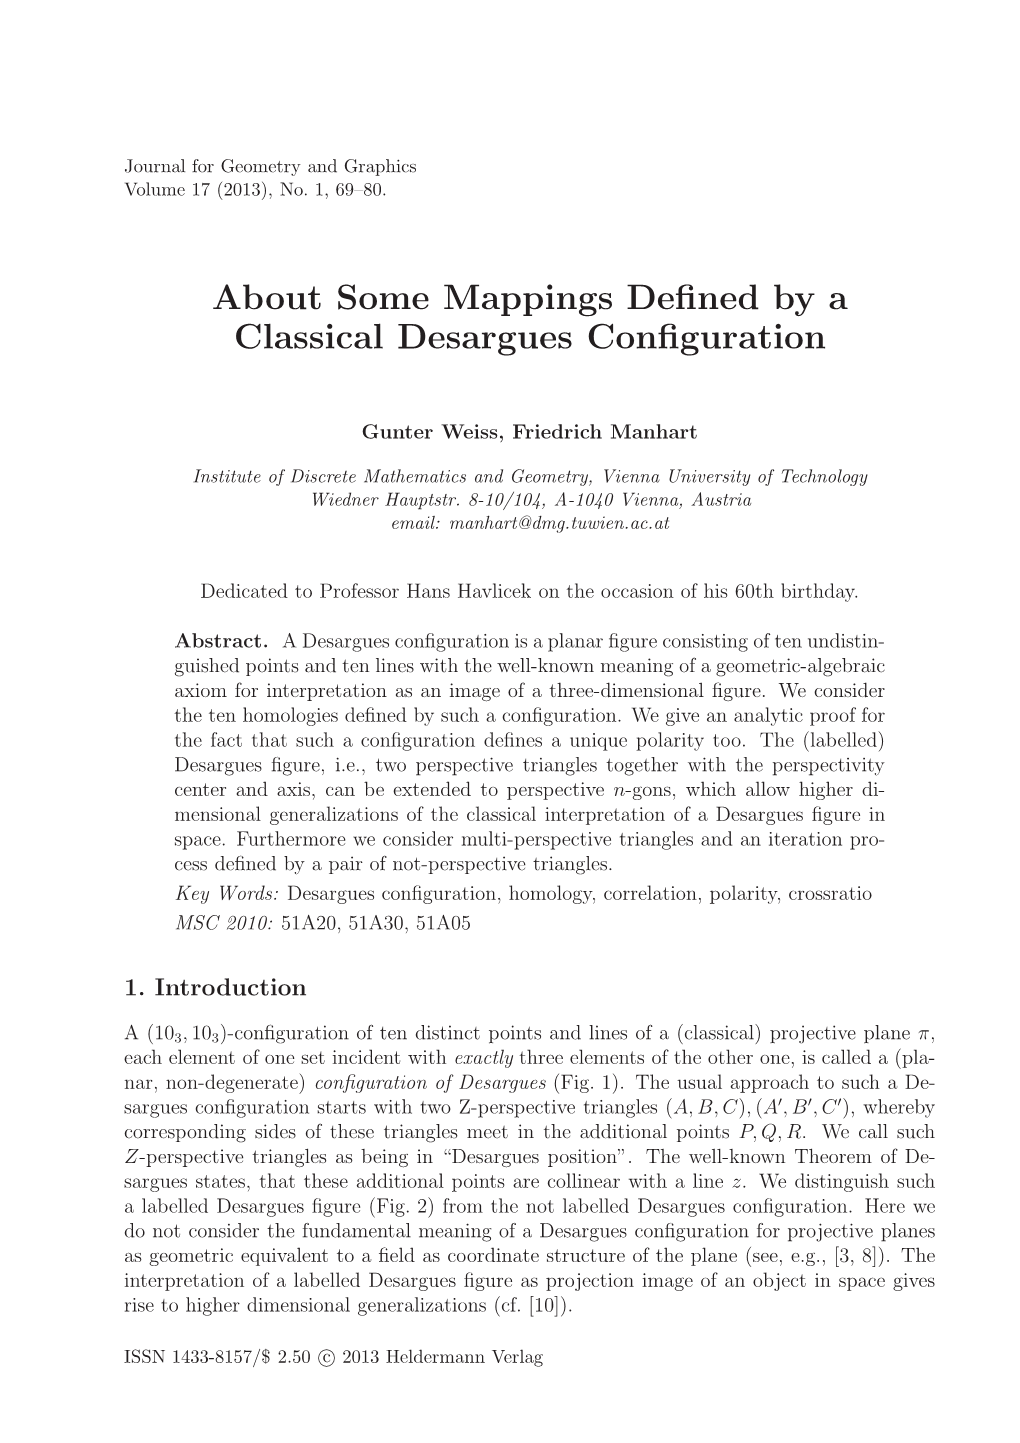 About Some Mappings Defined by a Classical Desargues Configuration